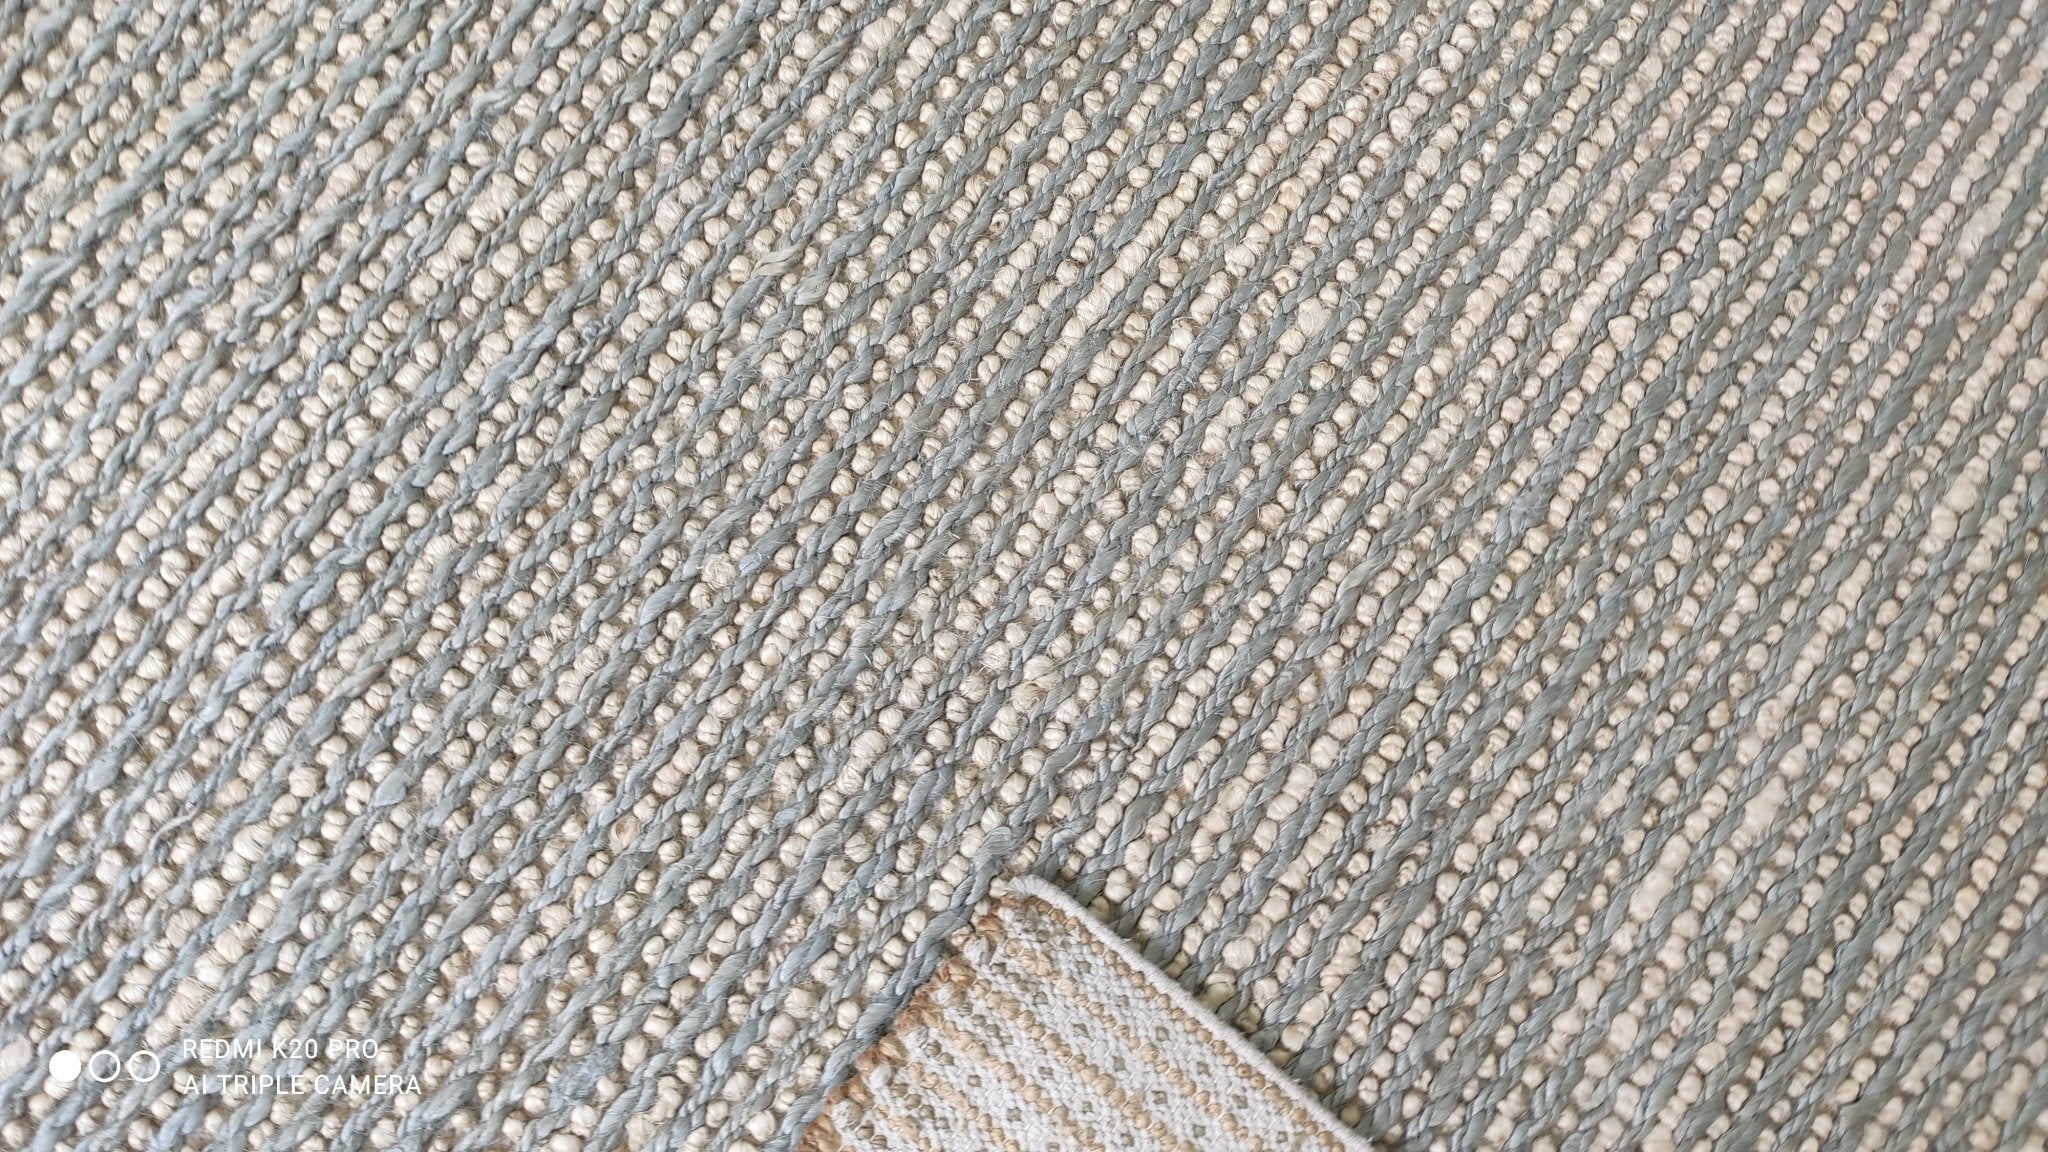 Tom Tuttle from Tacoma 5x8 Handwoven Natural and Grey Striped Jute Rug | Banana Manor Rug Company